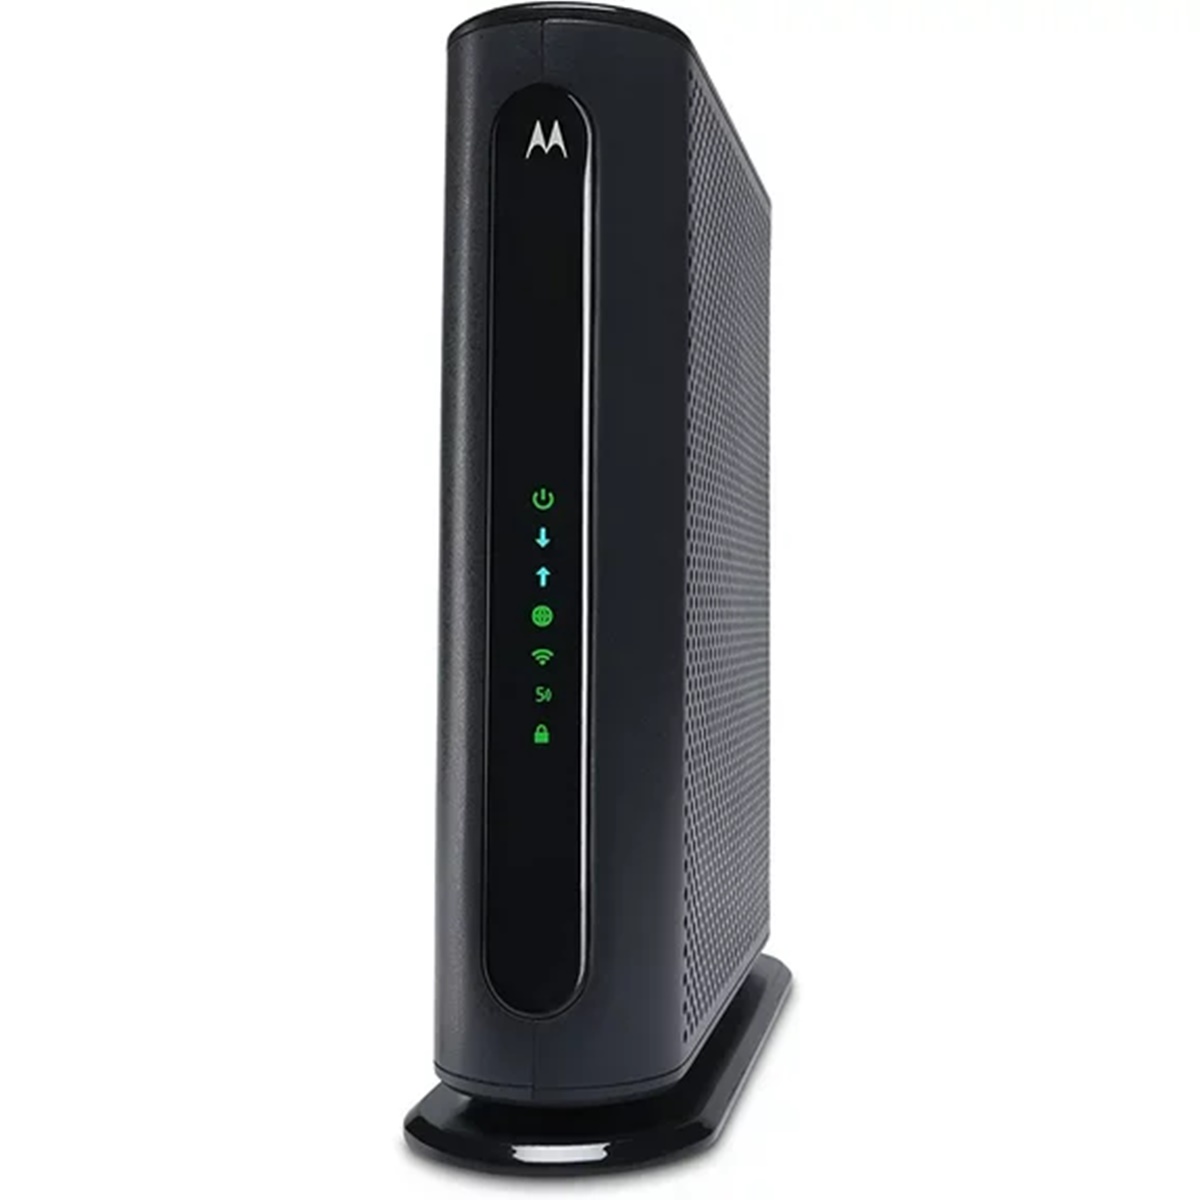 broadband-modems-in-high-speed-internet-access-and-use